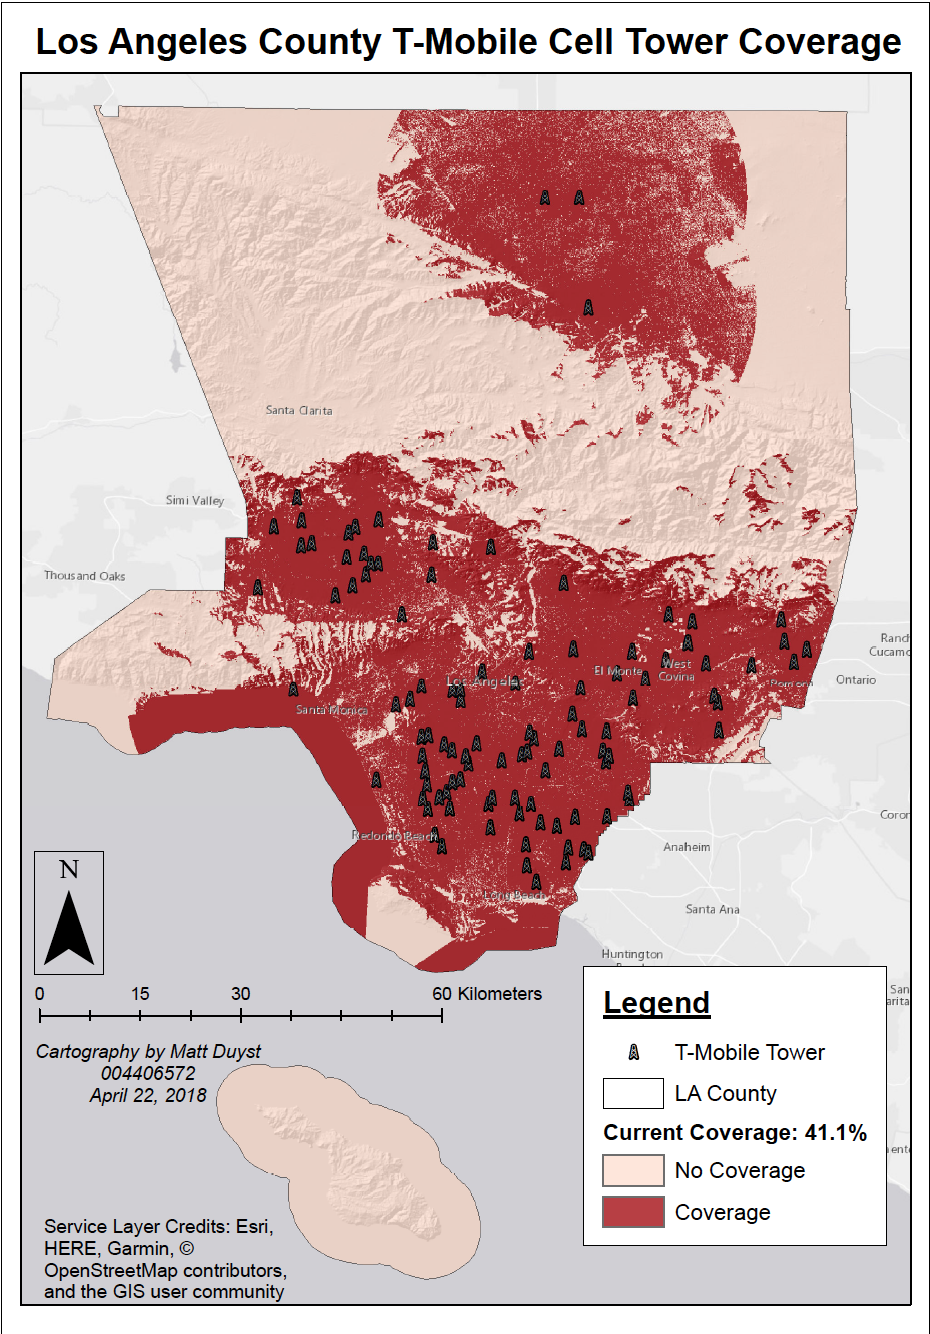 Modifications of T-Mobile Cell Towers for Accentuated Coverage Areas: Los Angeles, CA